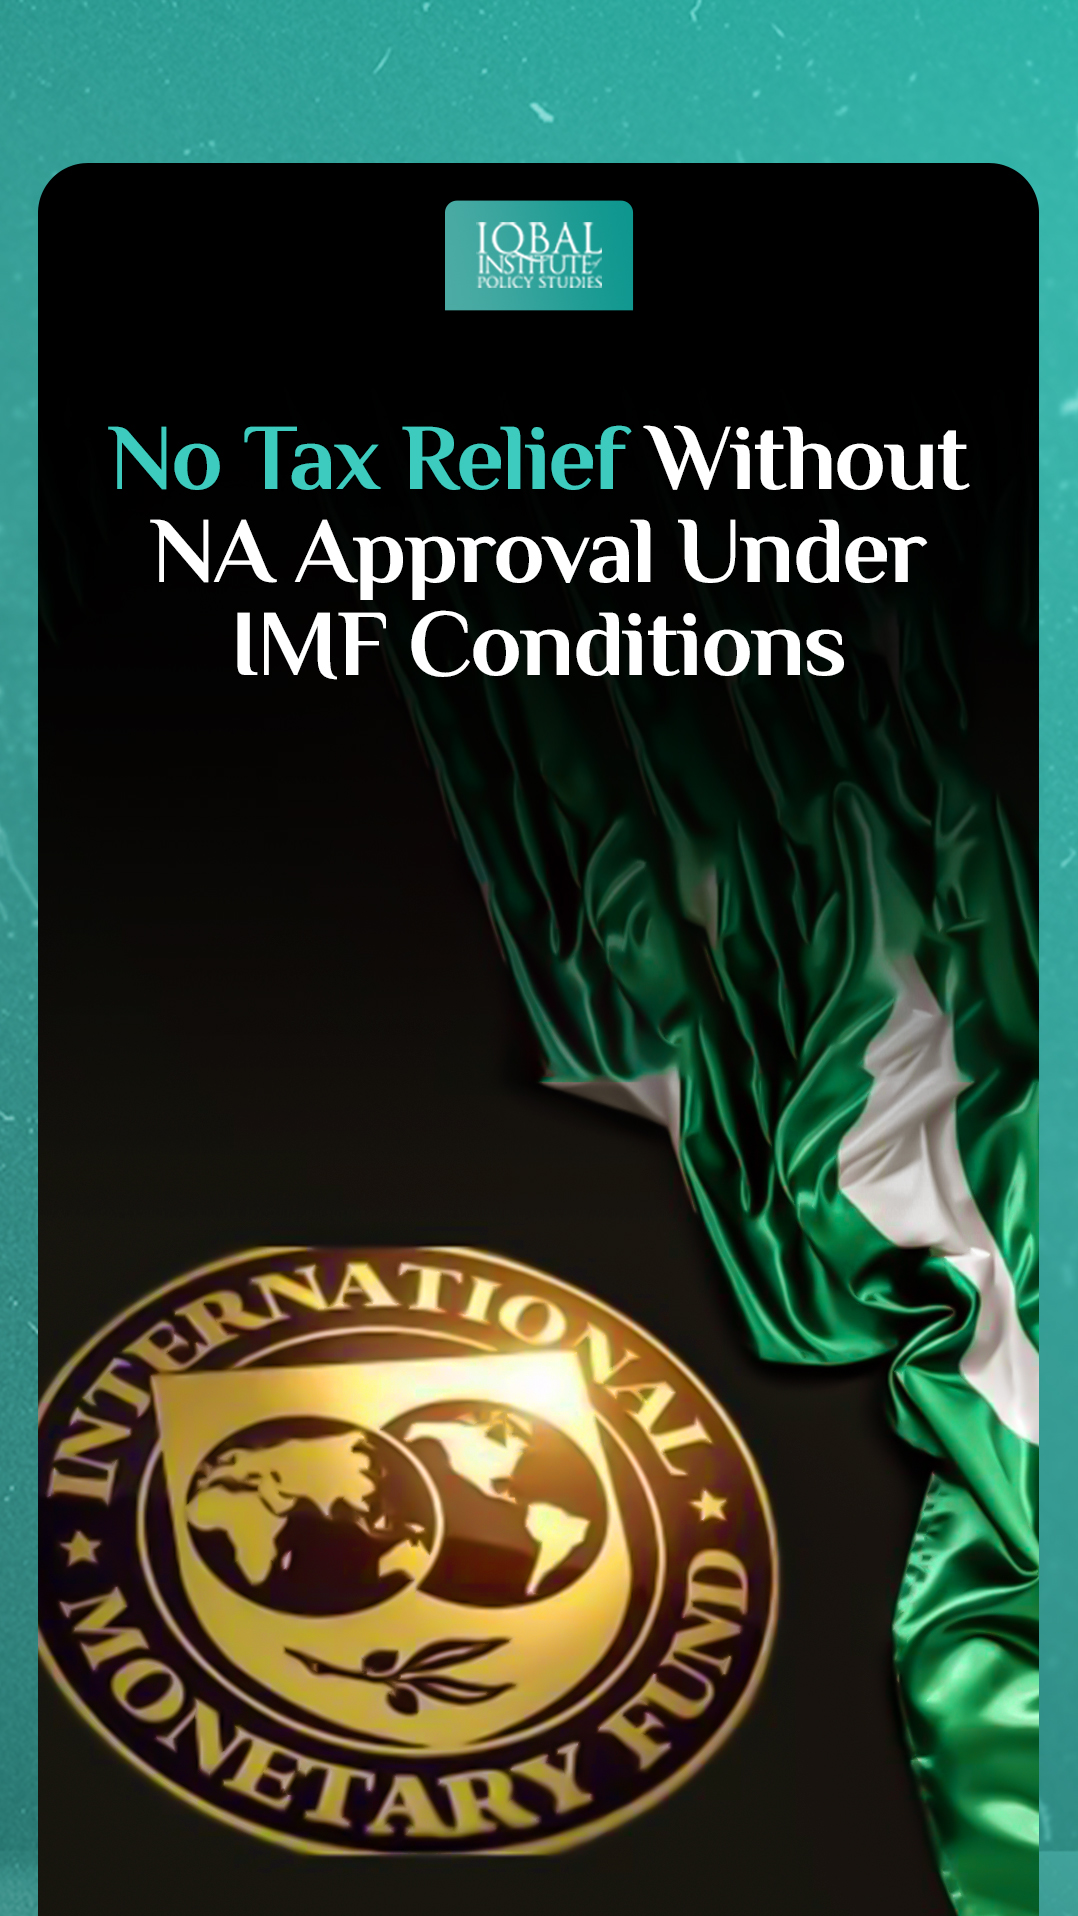 No tax relief without NA approval under IMF conditions